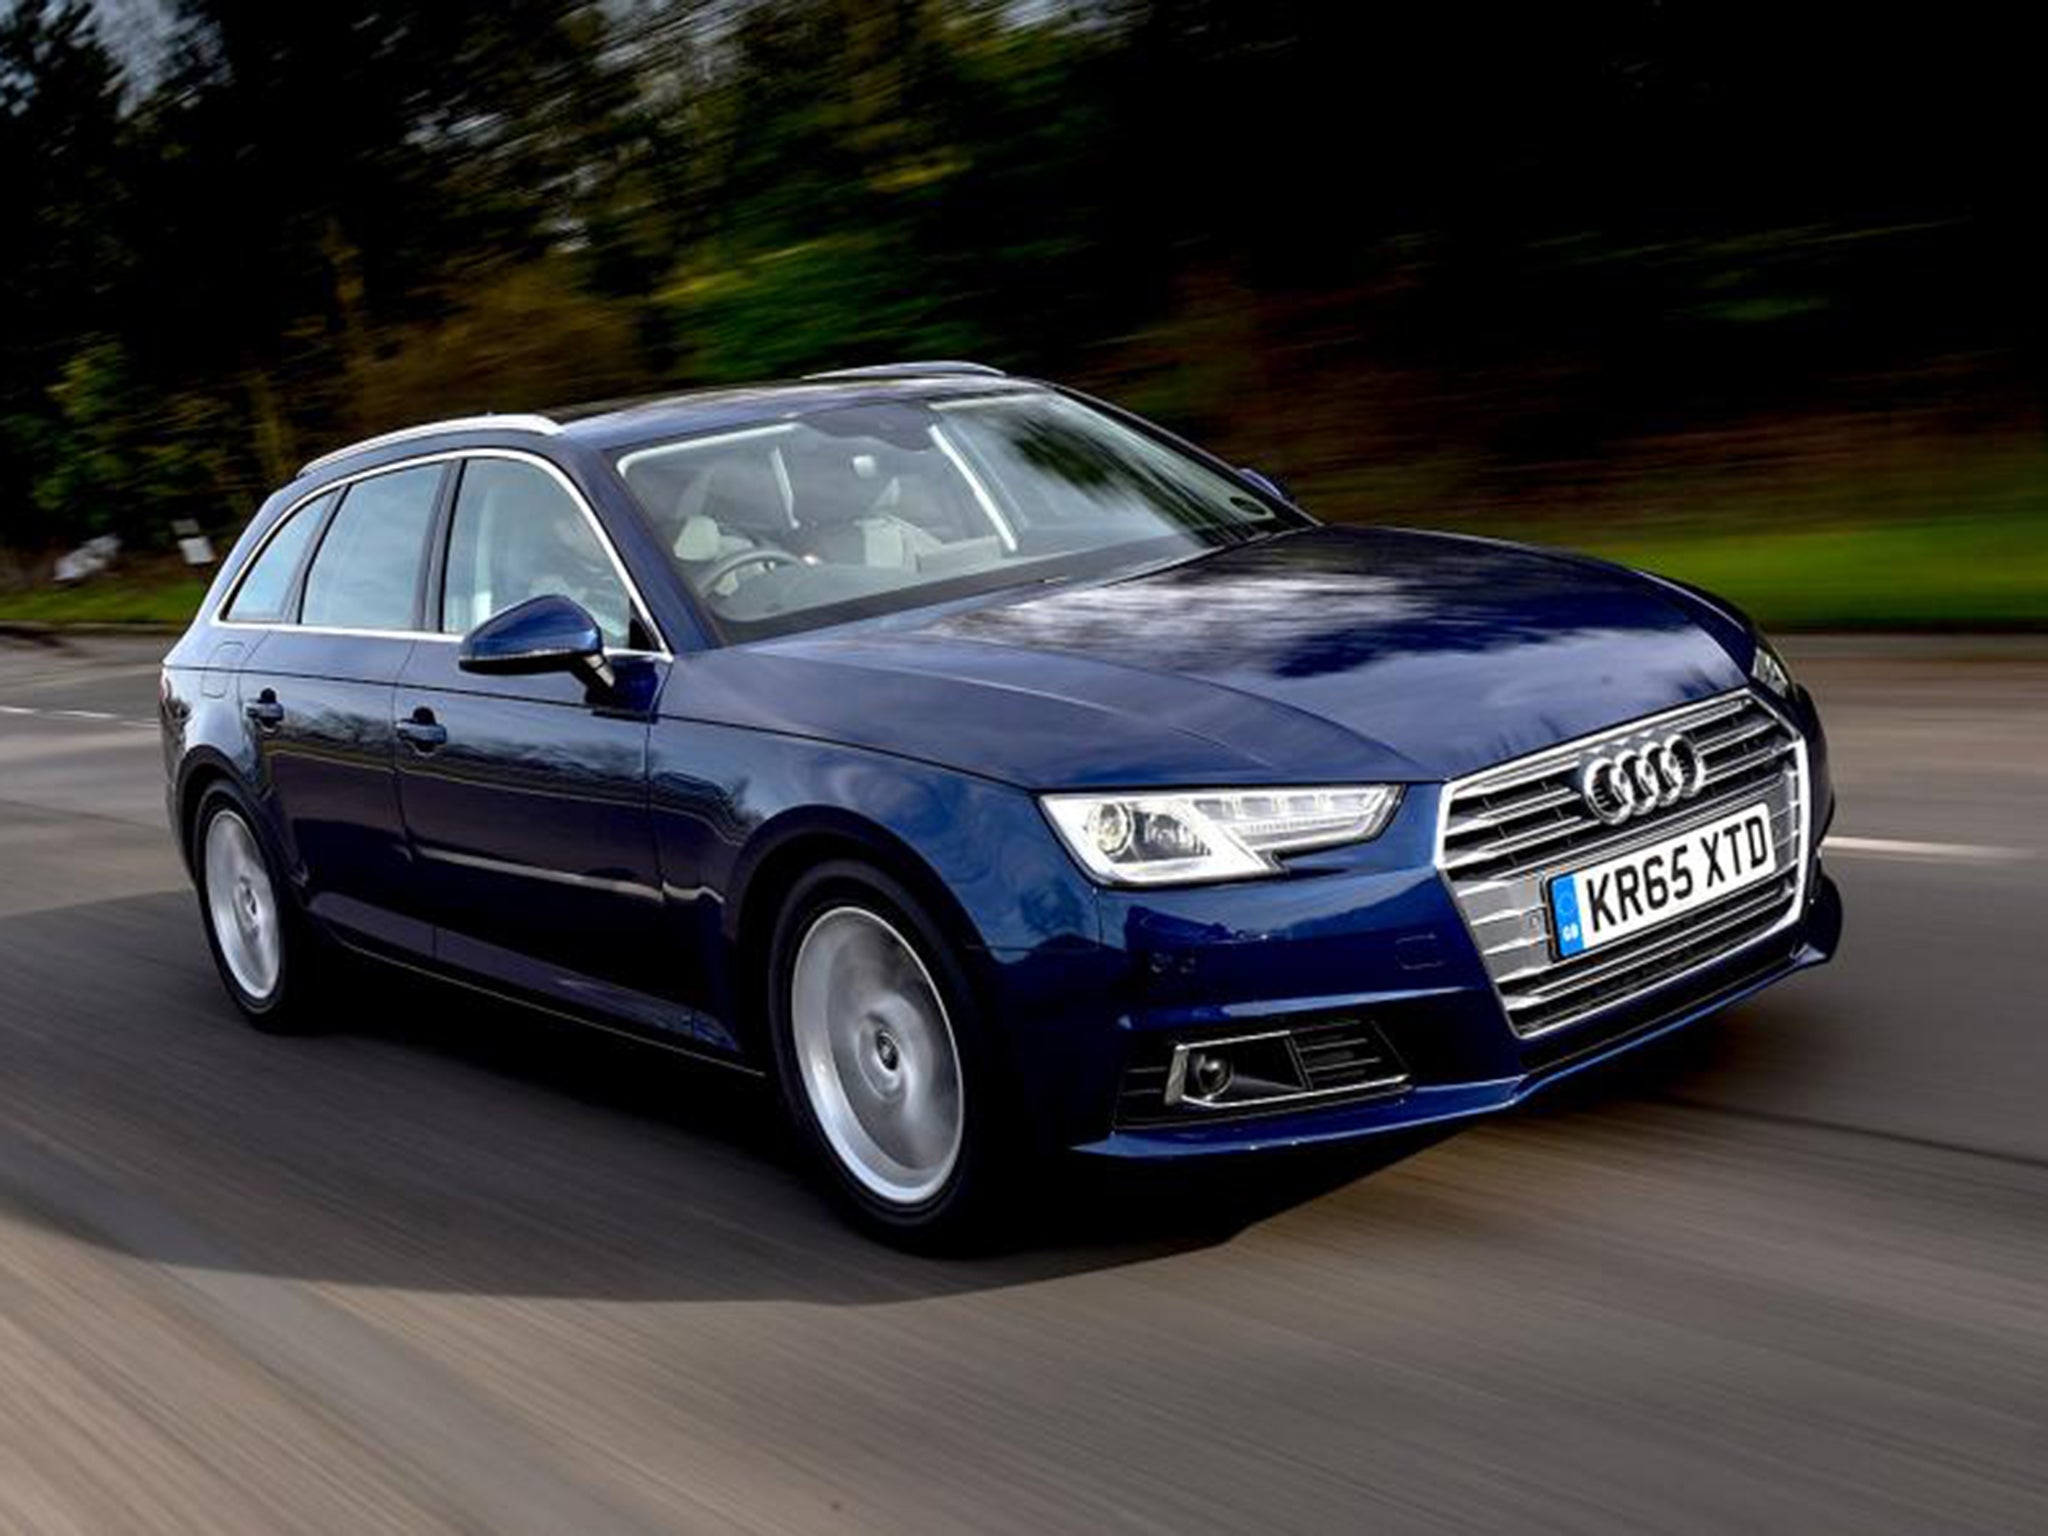 Audi A4 Avant 2.0 TDI 150 Ultra Sport, car review: Offering economy and style ...2048 x 1536